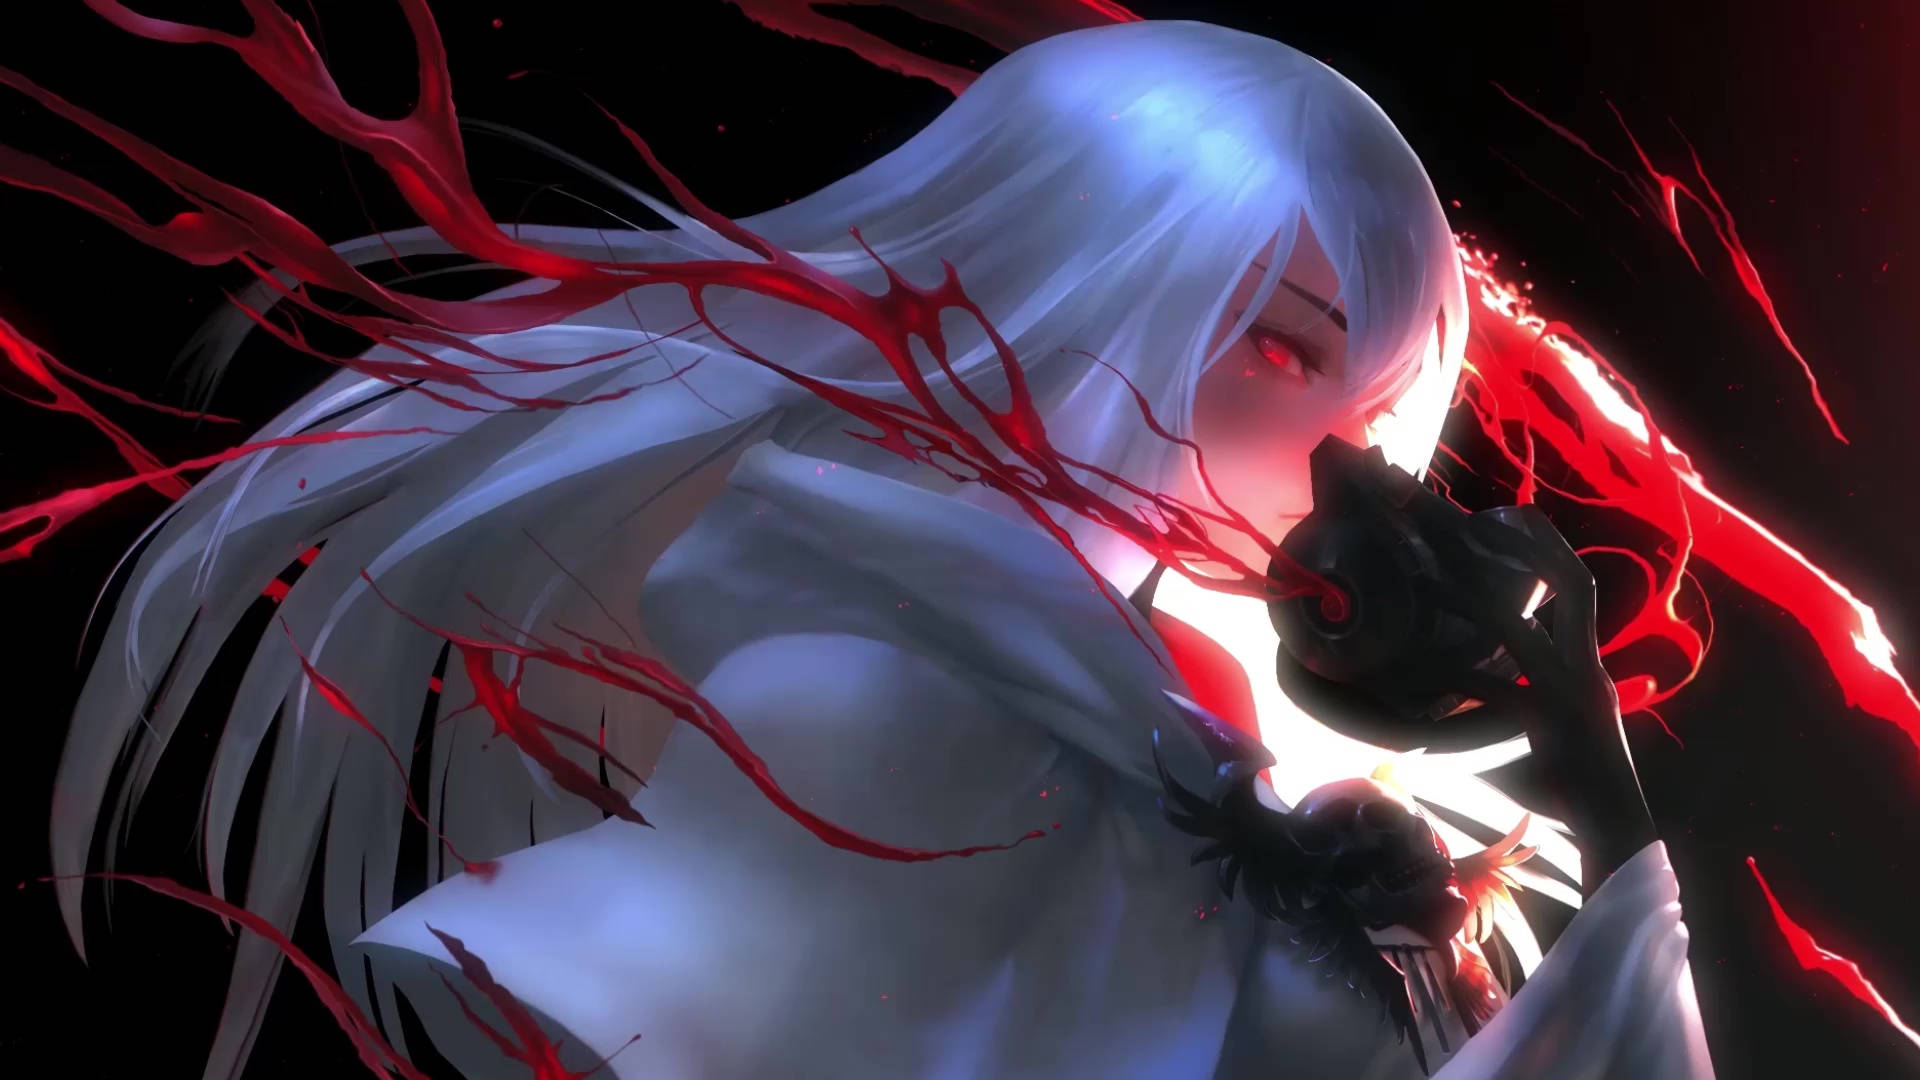 Explore the mysterious world of White Anime Wallpaper